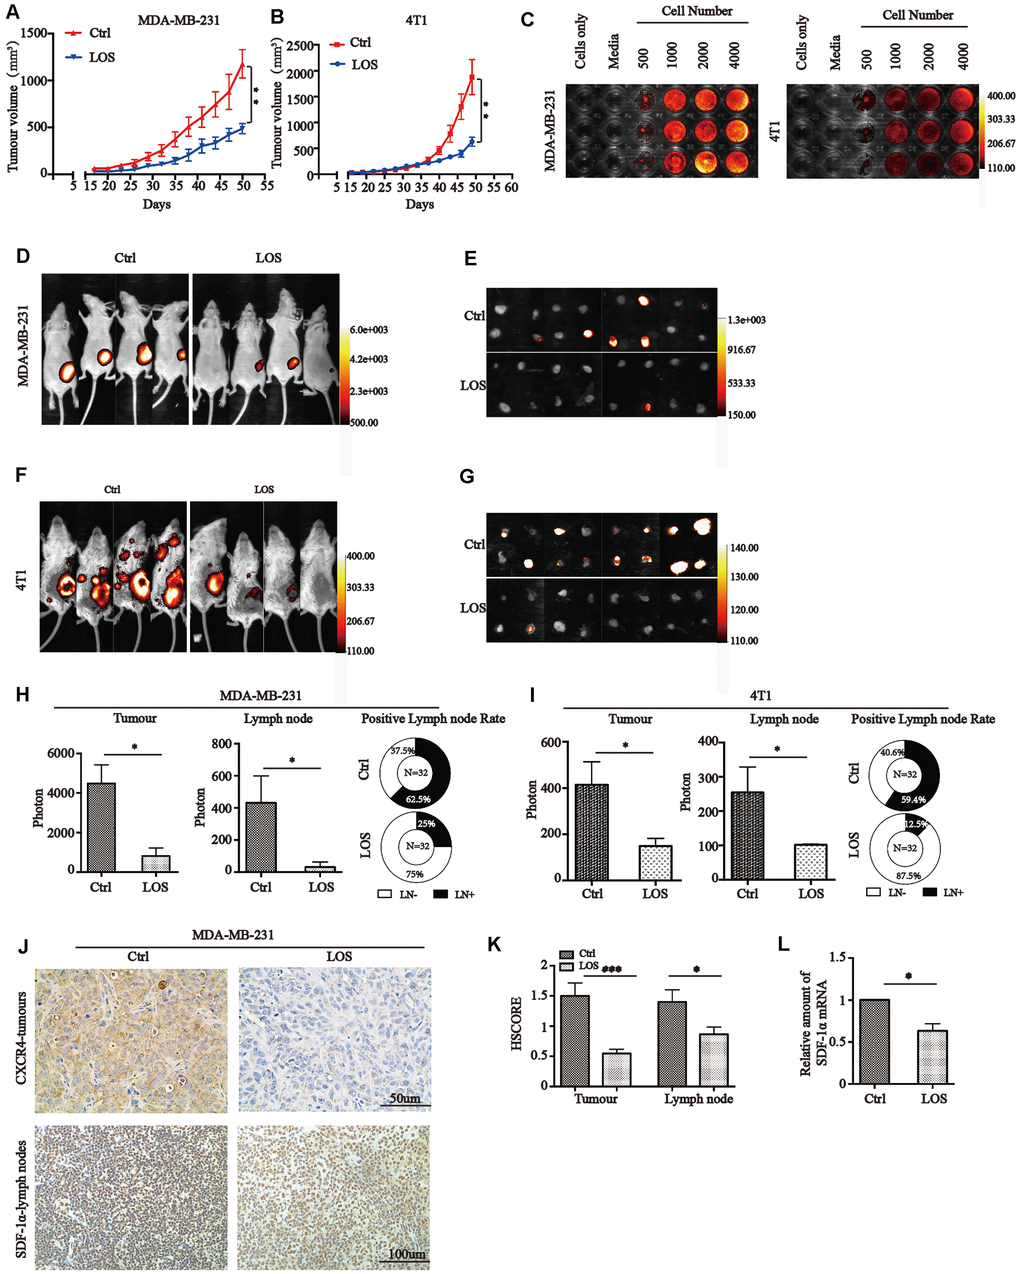 Losartan reduces tumor growth and lymph node metastasis through CXCR4/SDF-1α invivo. (A) and (B) MDA-MB-231 and 4T1 cells were injected into the fourth right mammary fat pad of nude mice and Balb/c mice. Two weeks after the injection, the tumor size was measured every 3 days. ** PC) BLI of MDA-MB-231 and 4T1 cells diluted in triplet wells from 4000 to 500 cells/well. Quantitative analysis of photon flux after adding luciferin substrate. (D) Representative images of MDA-MB-231 tumors and (E) lymph nodes for BLI analysis. Signal intensity was measured as photon flux (photons/second) and coded to a color scale. (F) Representative 4T1 tumor and (G) lymph node signal intensities were shown by BLI. The number of mice in each group was 8, and the total number of LN was 32. (H) and (I) Quantification of the signal intensities of tumors and lymph nodes and rates of lymph node metastasis in MDA-MB-231 and 4T1 tumors are shown below. * P0.05. (J) Representative xenograft samples and lymph nodes images in different groups. Tissues were subjected to immunohistochemical staining with anti-CXCR4 or anti-SDF-1α. (K) HSCORE of CXCR4 and SDF-1α protein expression in mice tumor tissues and lymph nodes. * P0.05, *** PL) Relative amount of SDF-1α mRNA in lymph node from different groups. * P0.05.